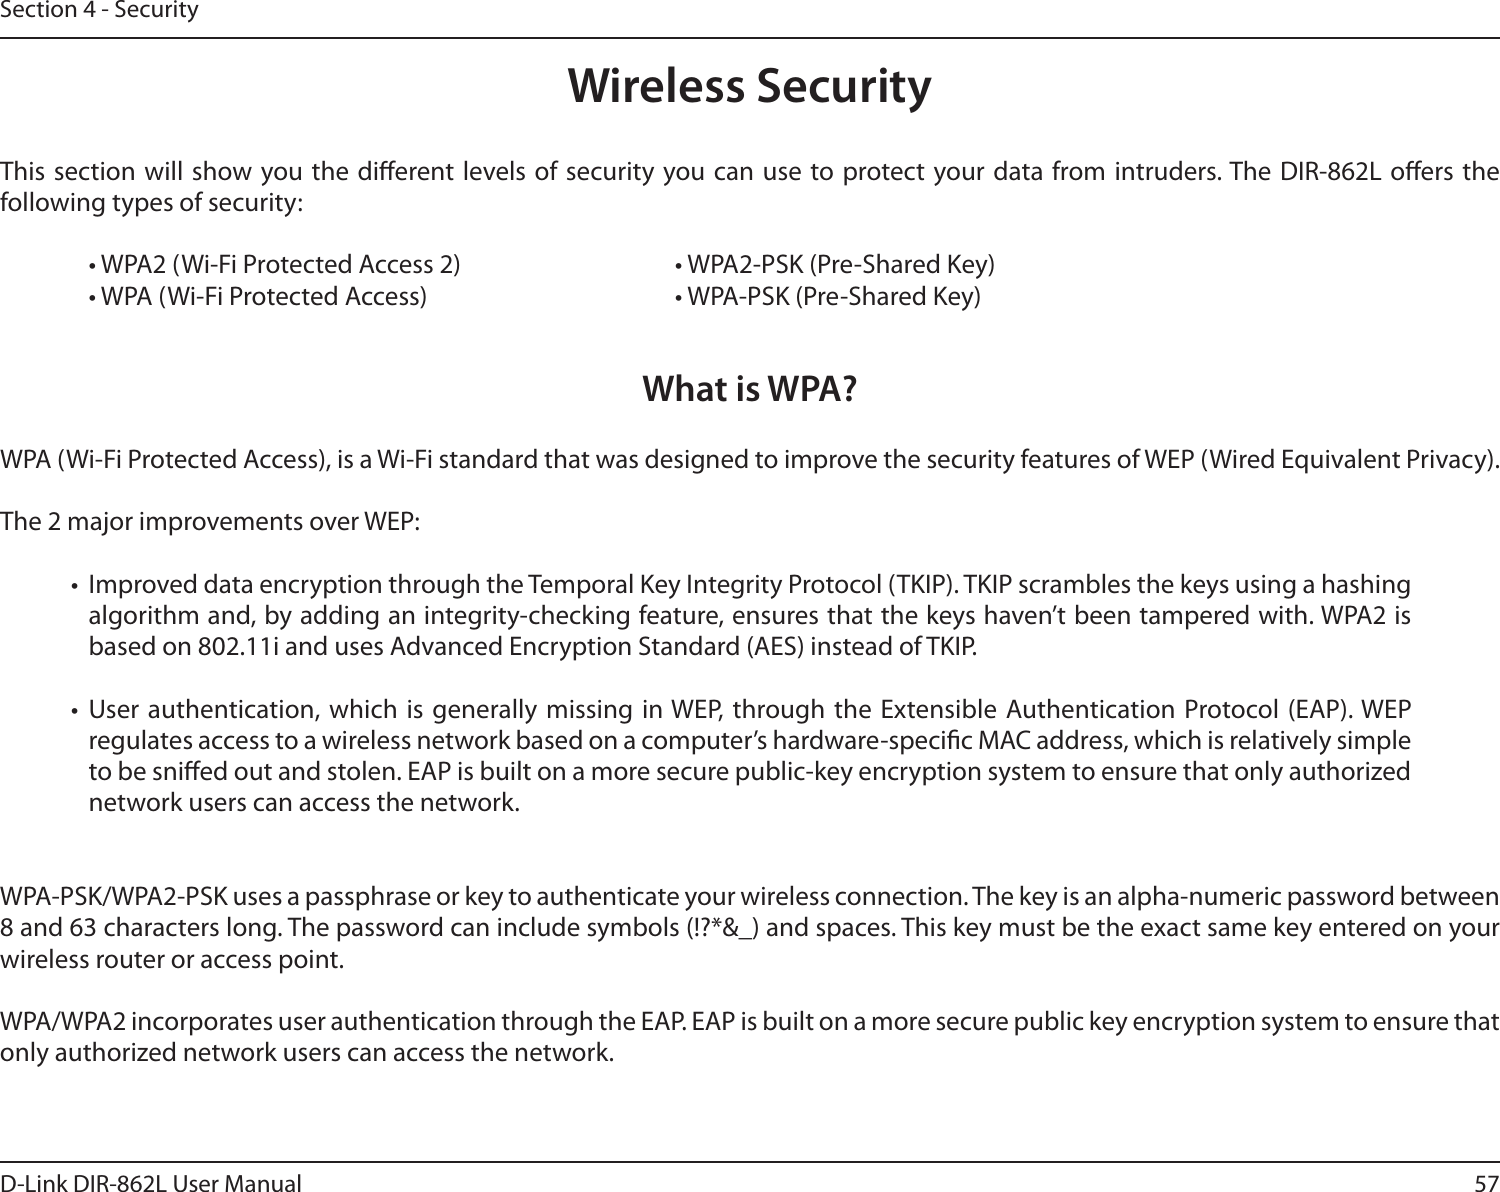 57D-Link DIR-862L User ManualSection 4 - SecurityWireless SecurityThis section will show you the dierent levels of security you can use to protect your data from intruders. The DIR-862L oers the following types of security:  • WPA2 (Wi-Fi Protected Access 2)       • WPA2-PSK (Pre-Shared Key)  • WPA (Wi-Fi Protected Access)        • WPA-PSK (Pre-Shared Key)What is WPA?WPA (Wi-Fi Protected Access), is a Wi-Fi standard that was designed to improve the security features of WEP (Wired Equivalent Privacy).  The 2 major improvements over WEP: •  Improved data encryption through the Temporal Key Integrity Protocol (TKIP). TKIP scrambles the keys using a hashing algorithm and, by adding an integrity-checking feature, ensures that the keys haven’t been tampered with. WPA2 is based on 802.11i and uses Advanced Encryption Standard (AES) instead of TKIP.• User authentication, which is generally missing in WEP, through the Extensible Authentication Protocol (EAP). WEP regulates access to a wireless network based on a computer’s hardware-specic MAC address, which is relatively simple to be snied out and stolen. EAP is built on a more secure public-key encryption system to ensure that only authorized network users can access the network.WPA-PSK/WPA2-PSK uses a passphrase or key to authenticate your wireless connection. The key is an alpha-numeric password between 8 and 63 characters long. The password can include symbols (!?*&amp;_) and spaces. This key must be the exact same key entered on your wireless router or access point.WPA/WPA2 incorporates user authentication through the EAP. EAP is built on a more secure public key encryption system to ensure that only authorized network users can access the network.